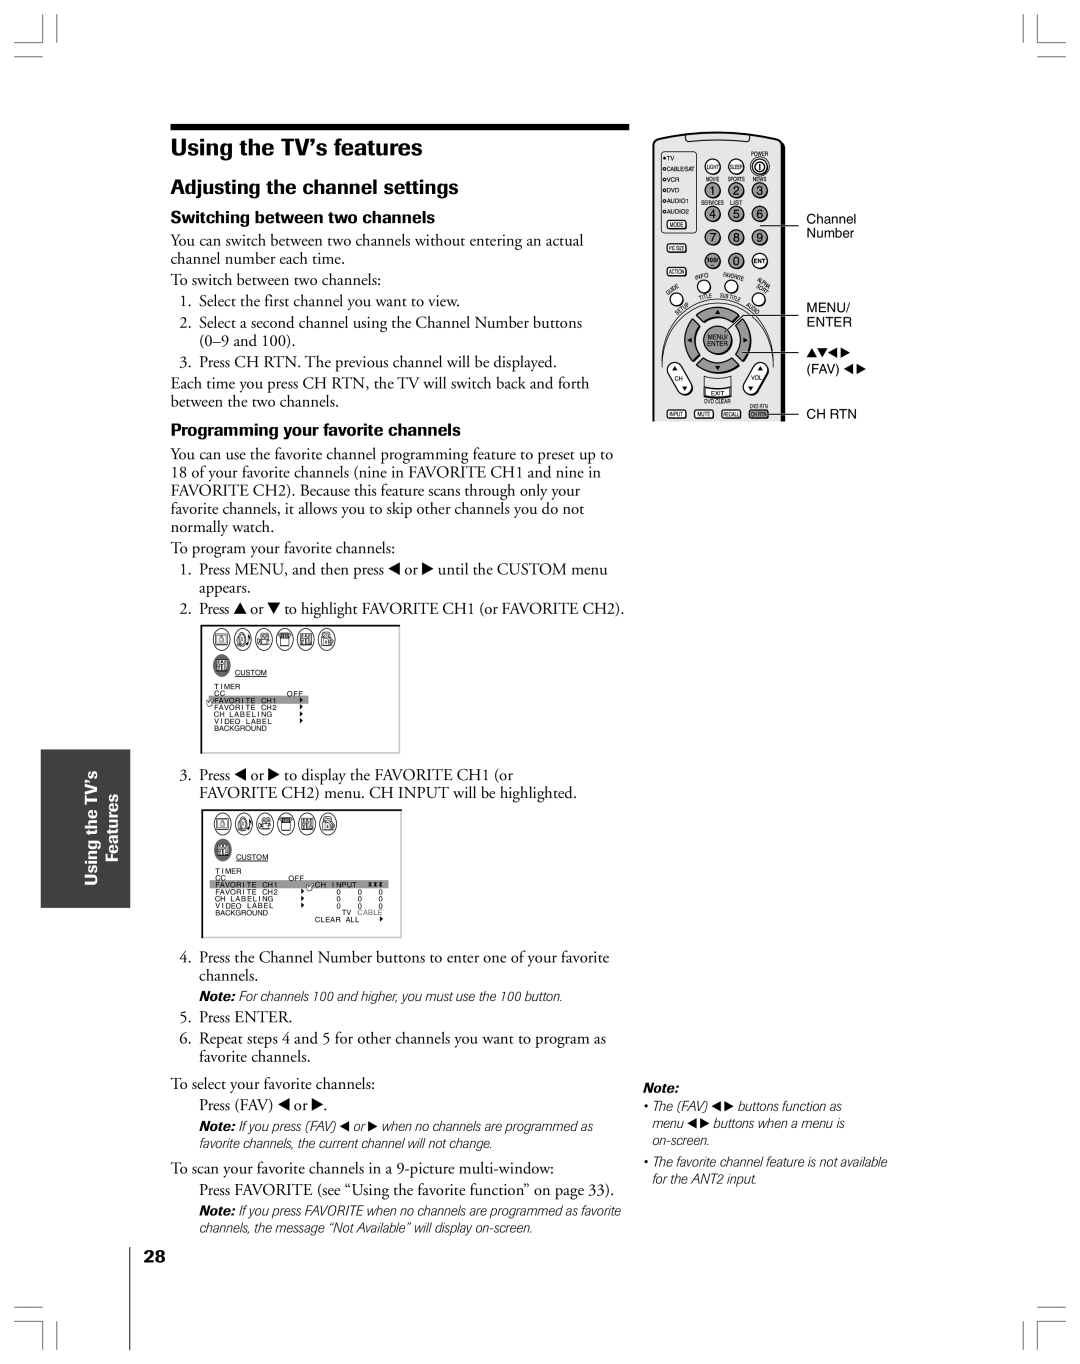 Toshiba 53AX62 Using the TV’s features, Adjusting the channel settings, Switching between two channels, the TV’s Features 